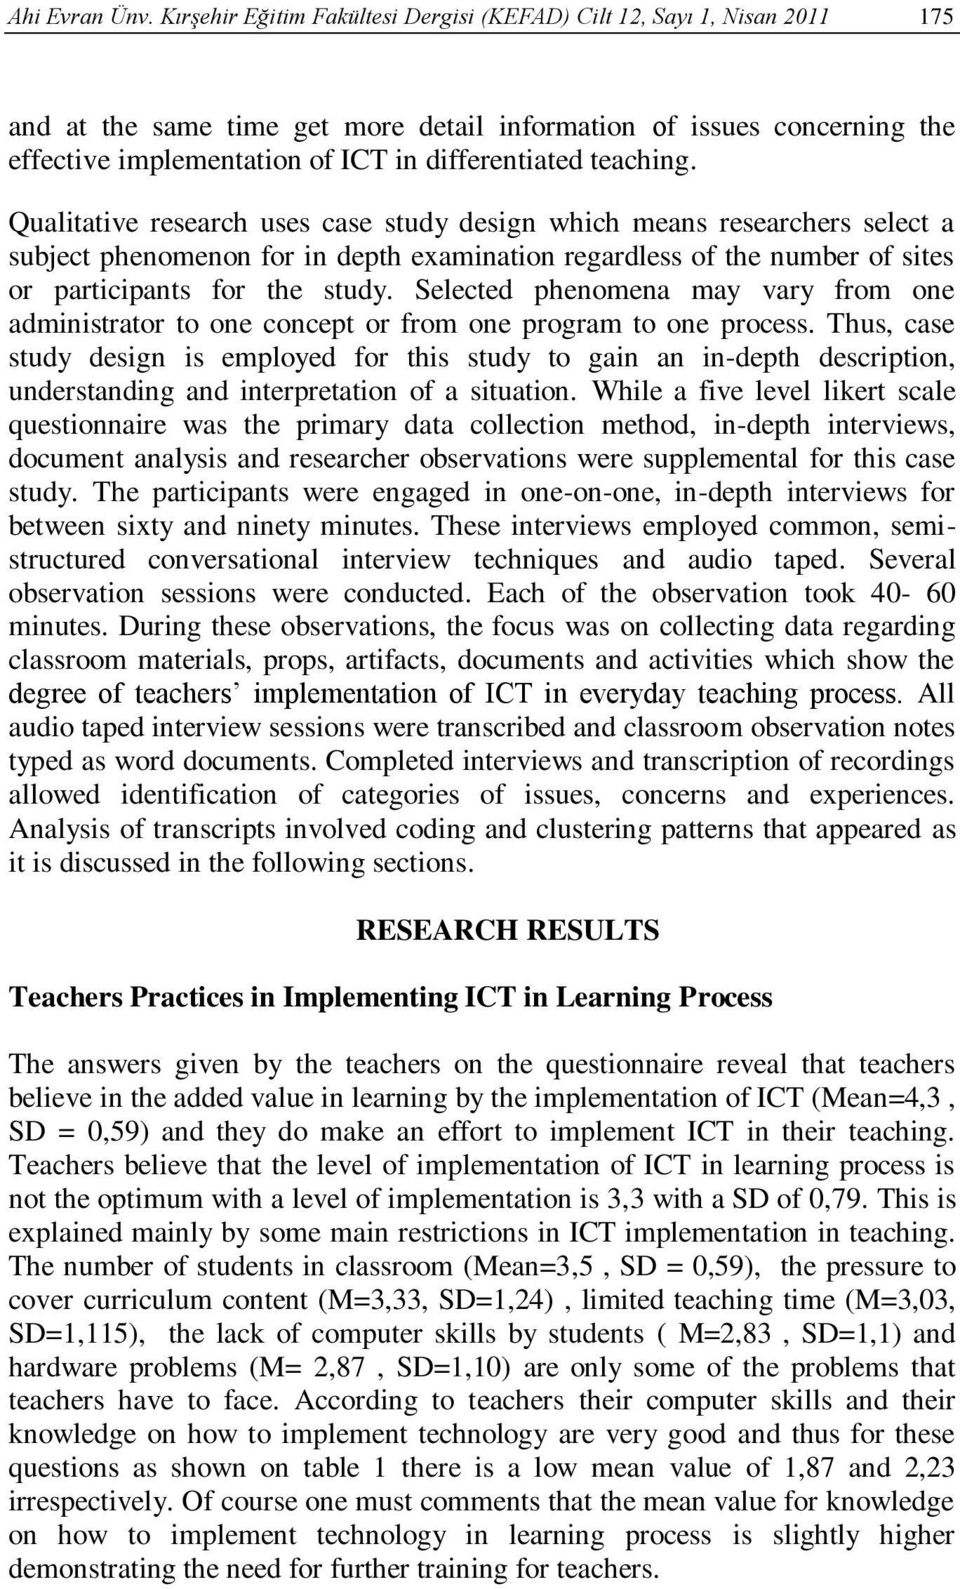 teaching. Qualitative research uses case study design which means researchers select a subject phenomenon for in depth examination regardless of the number of sites or participants for the study.